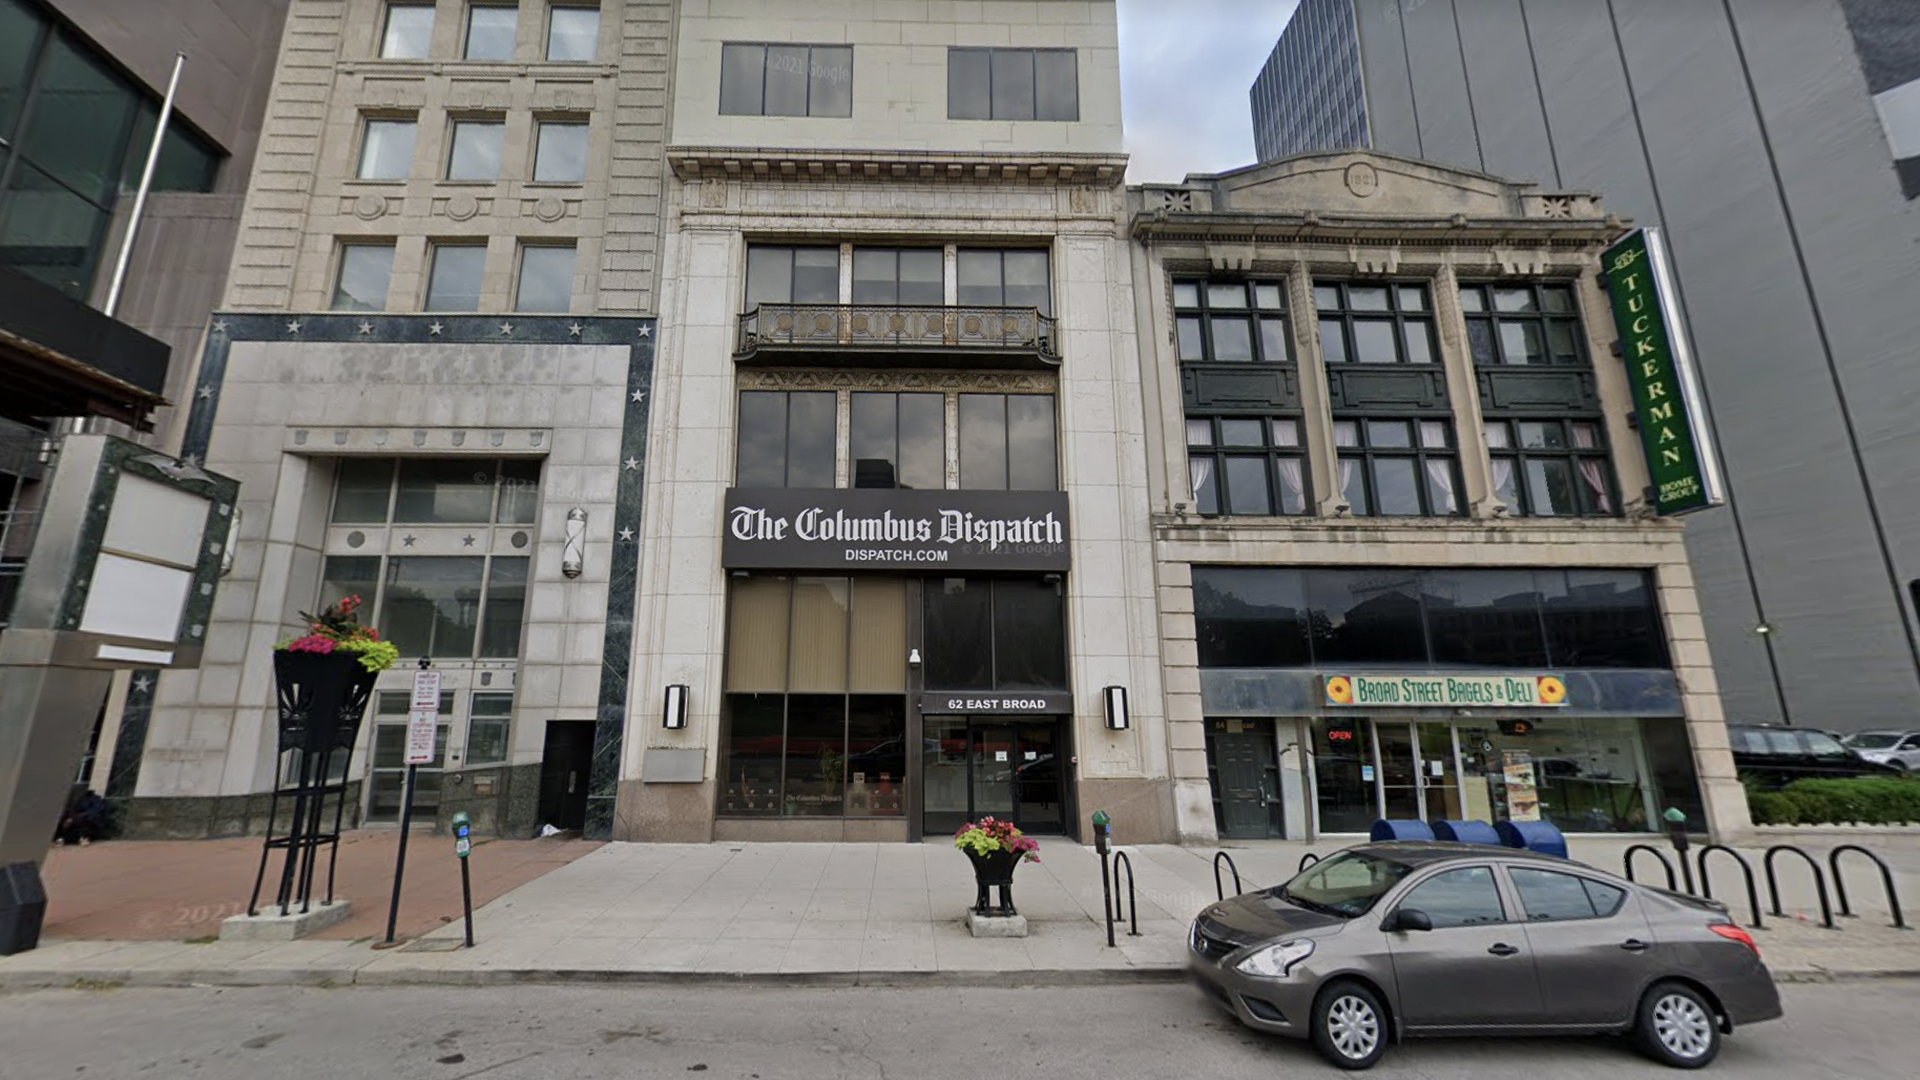 The front of the Columbus Dispatch building